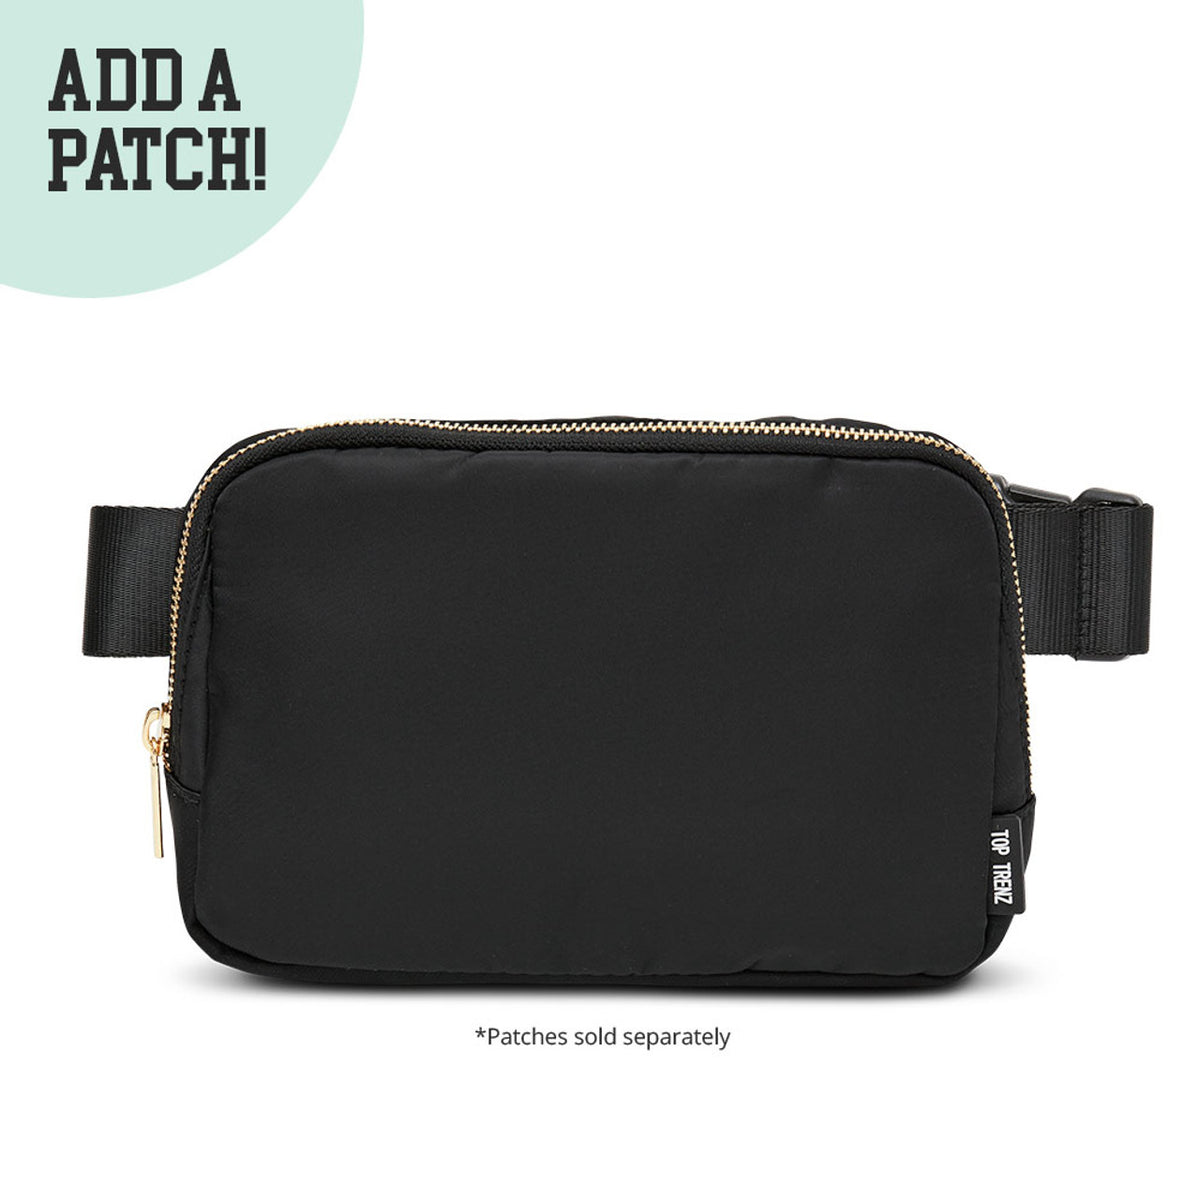 Top Trenz Nylon Belt Bag - Customize With Patches * 4 Colors *